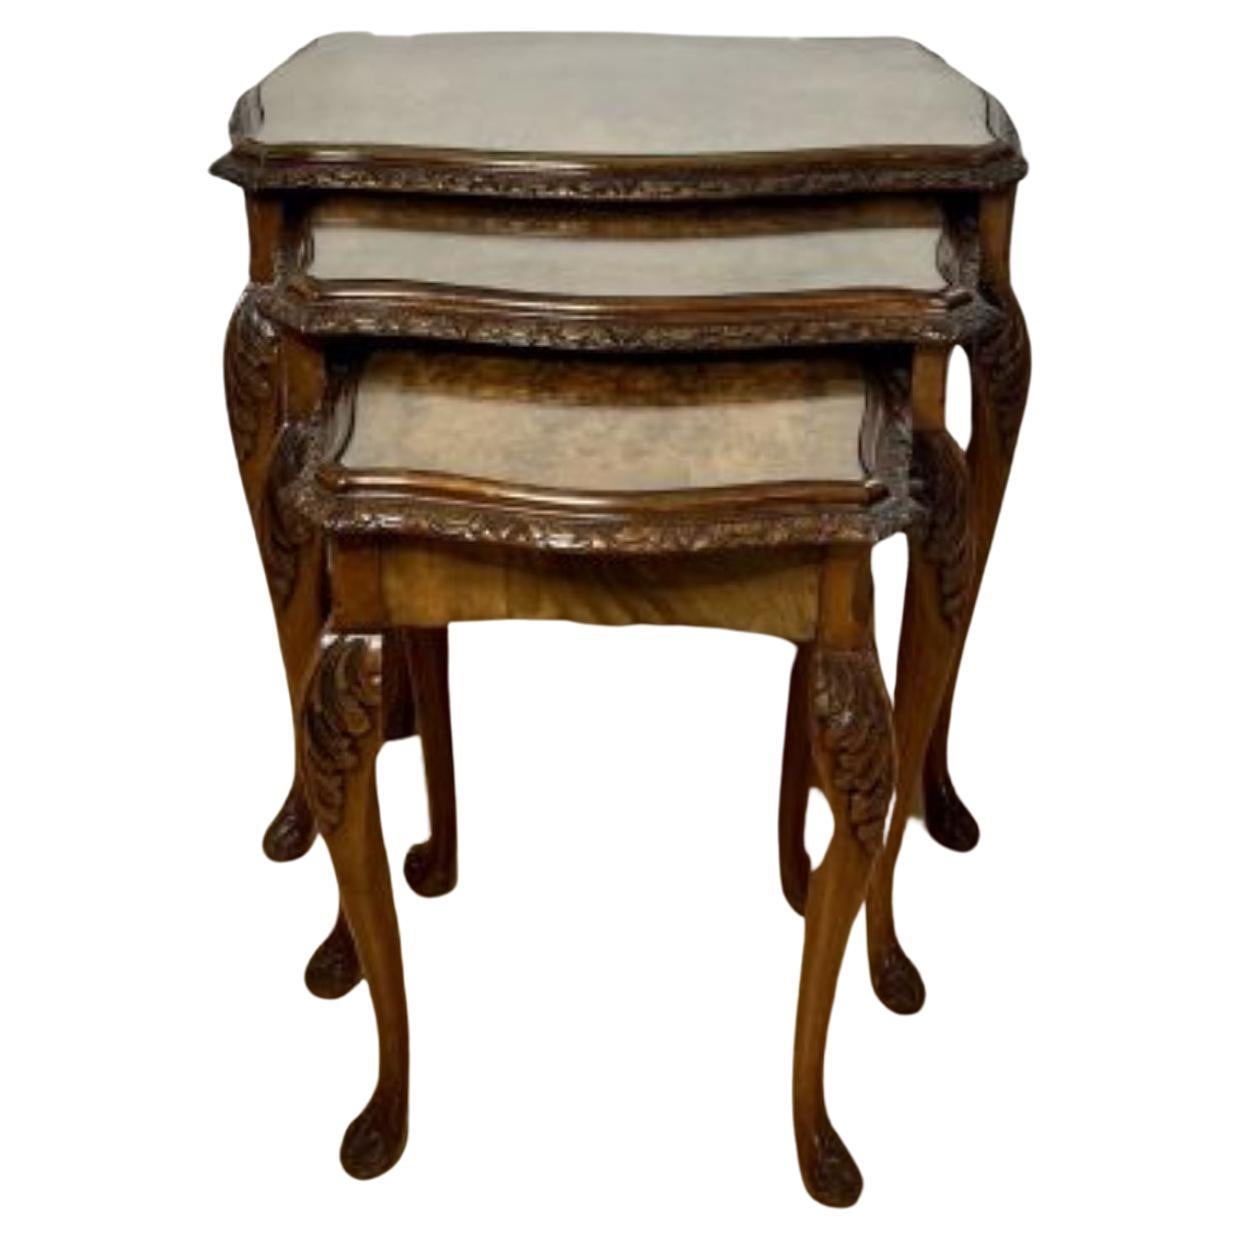 Outstanding quality antique burr walnut nest of three tables 